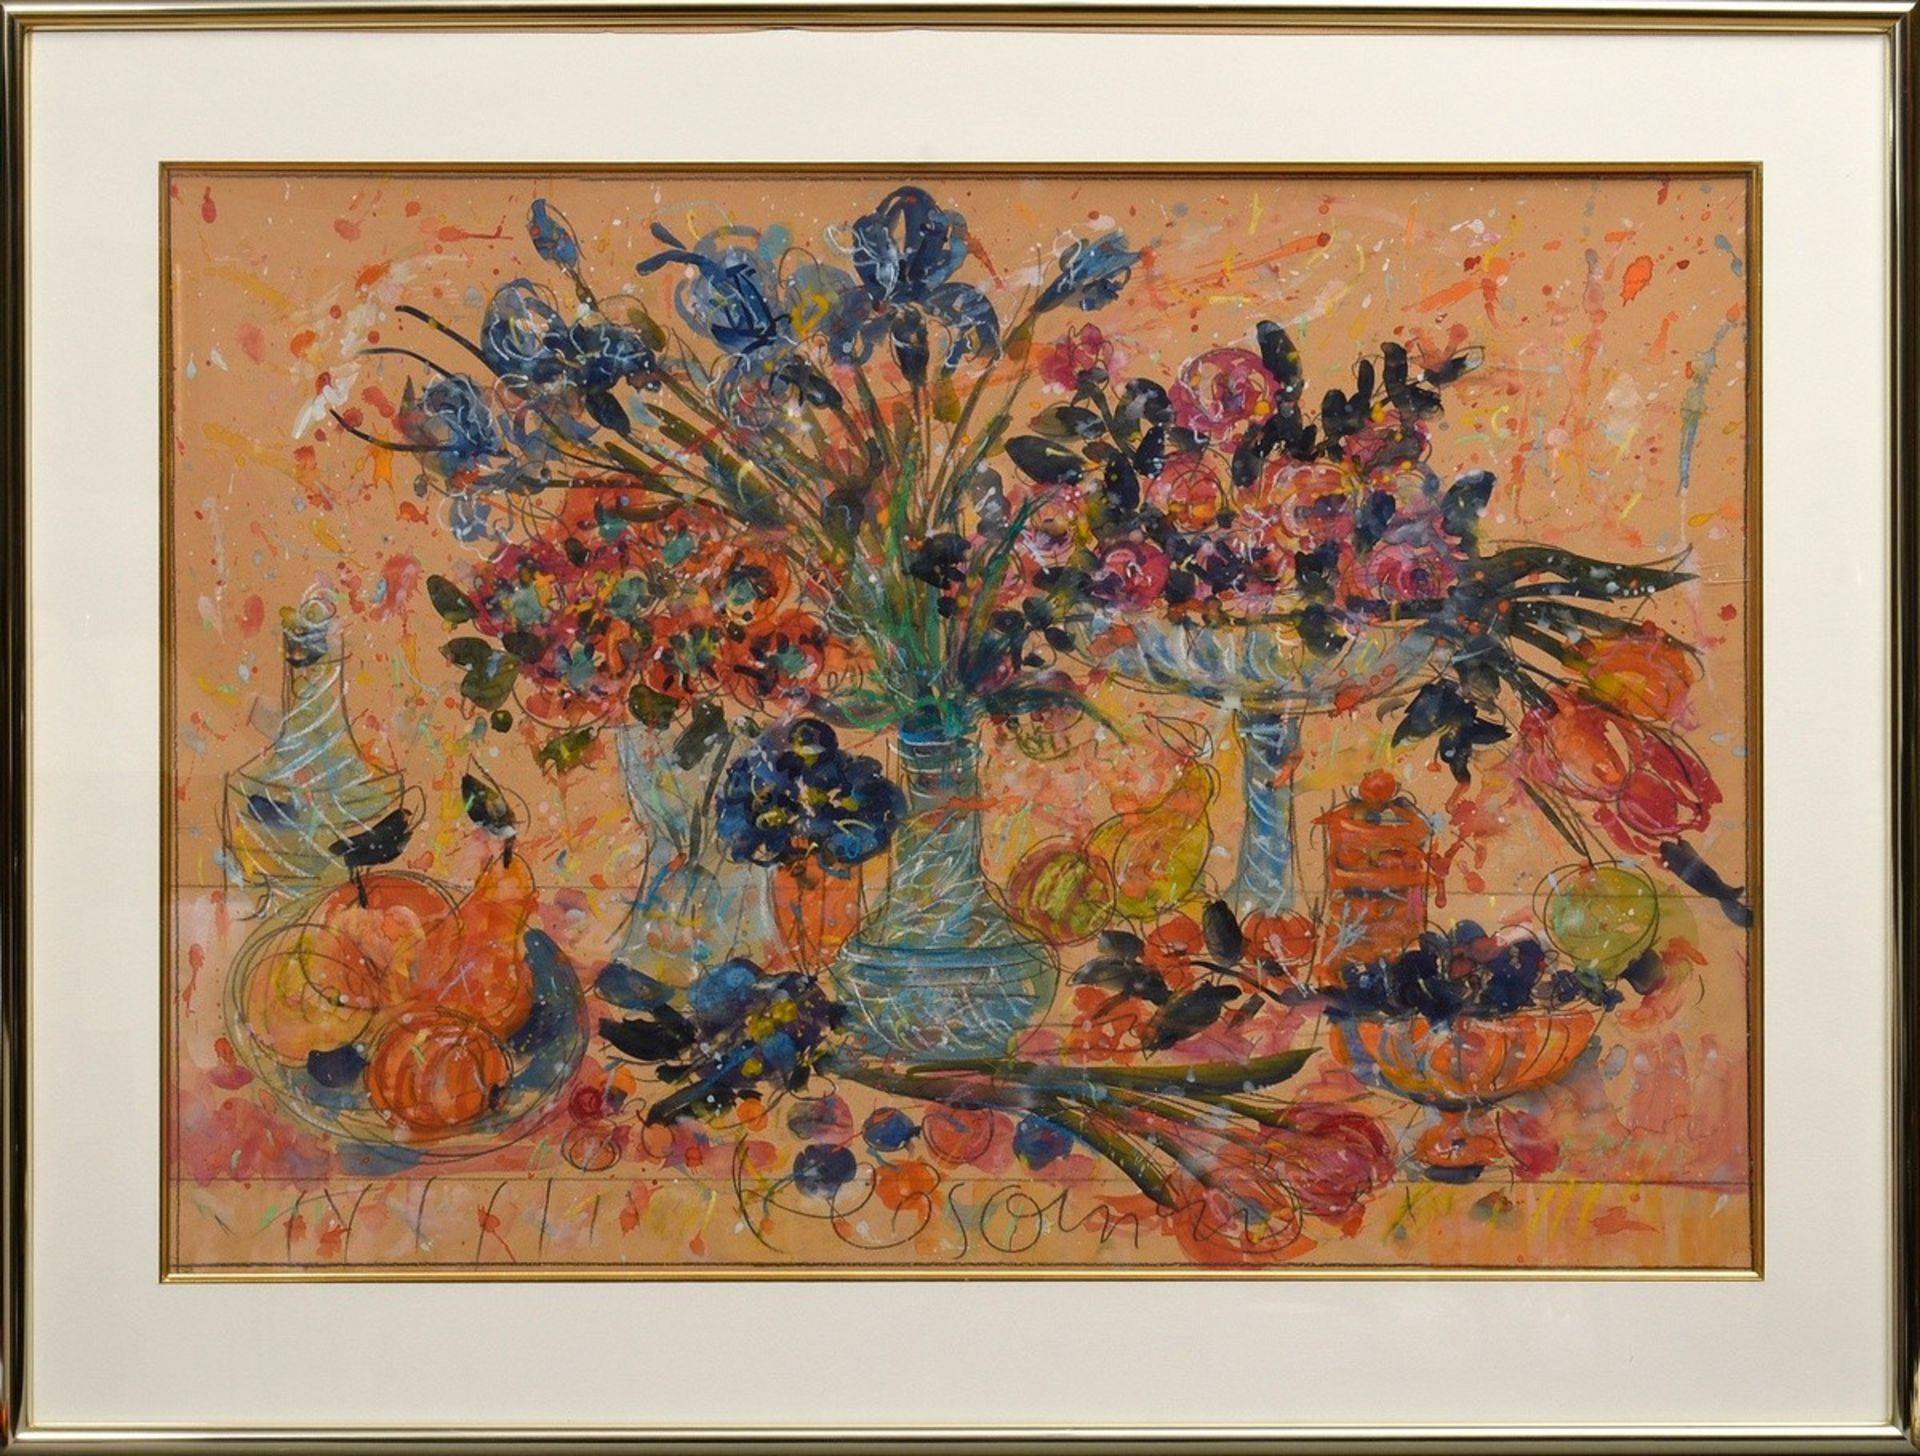 Klosowski, Alfred (*1927) "Still life with flowers, vases and fruits", watercolour/pastel crayon on - Image 2 of 3